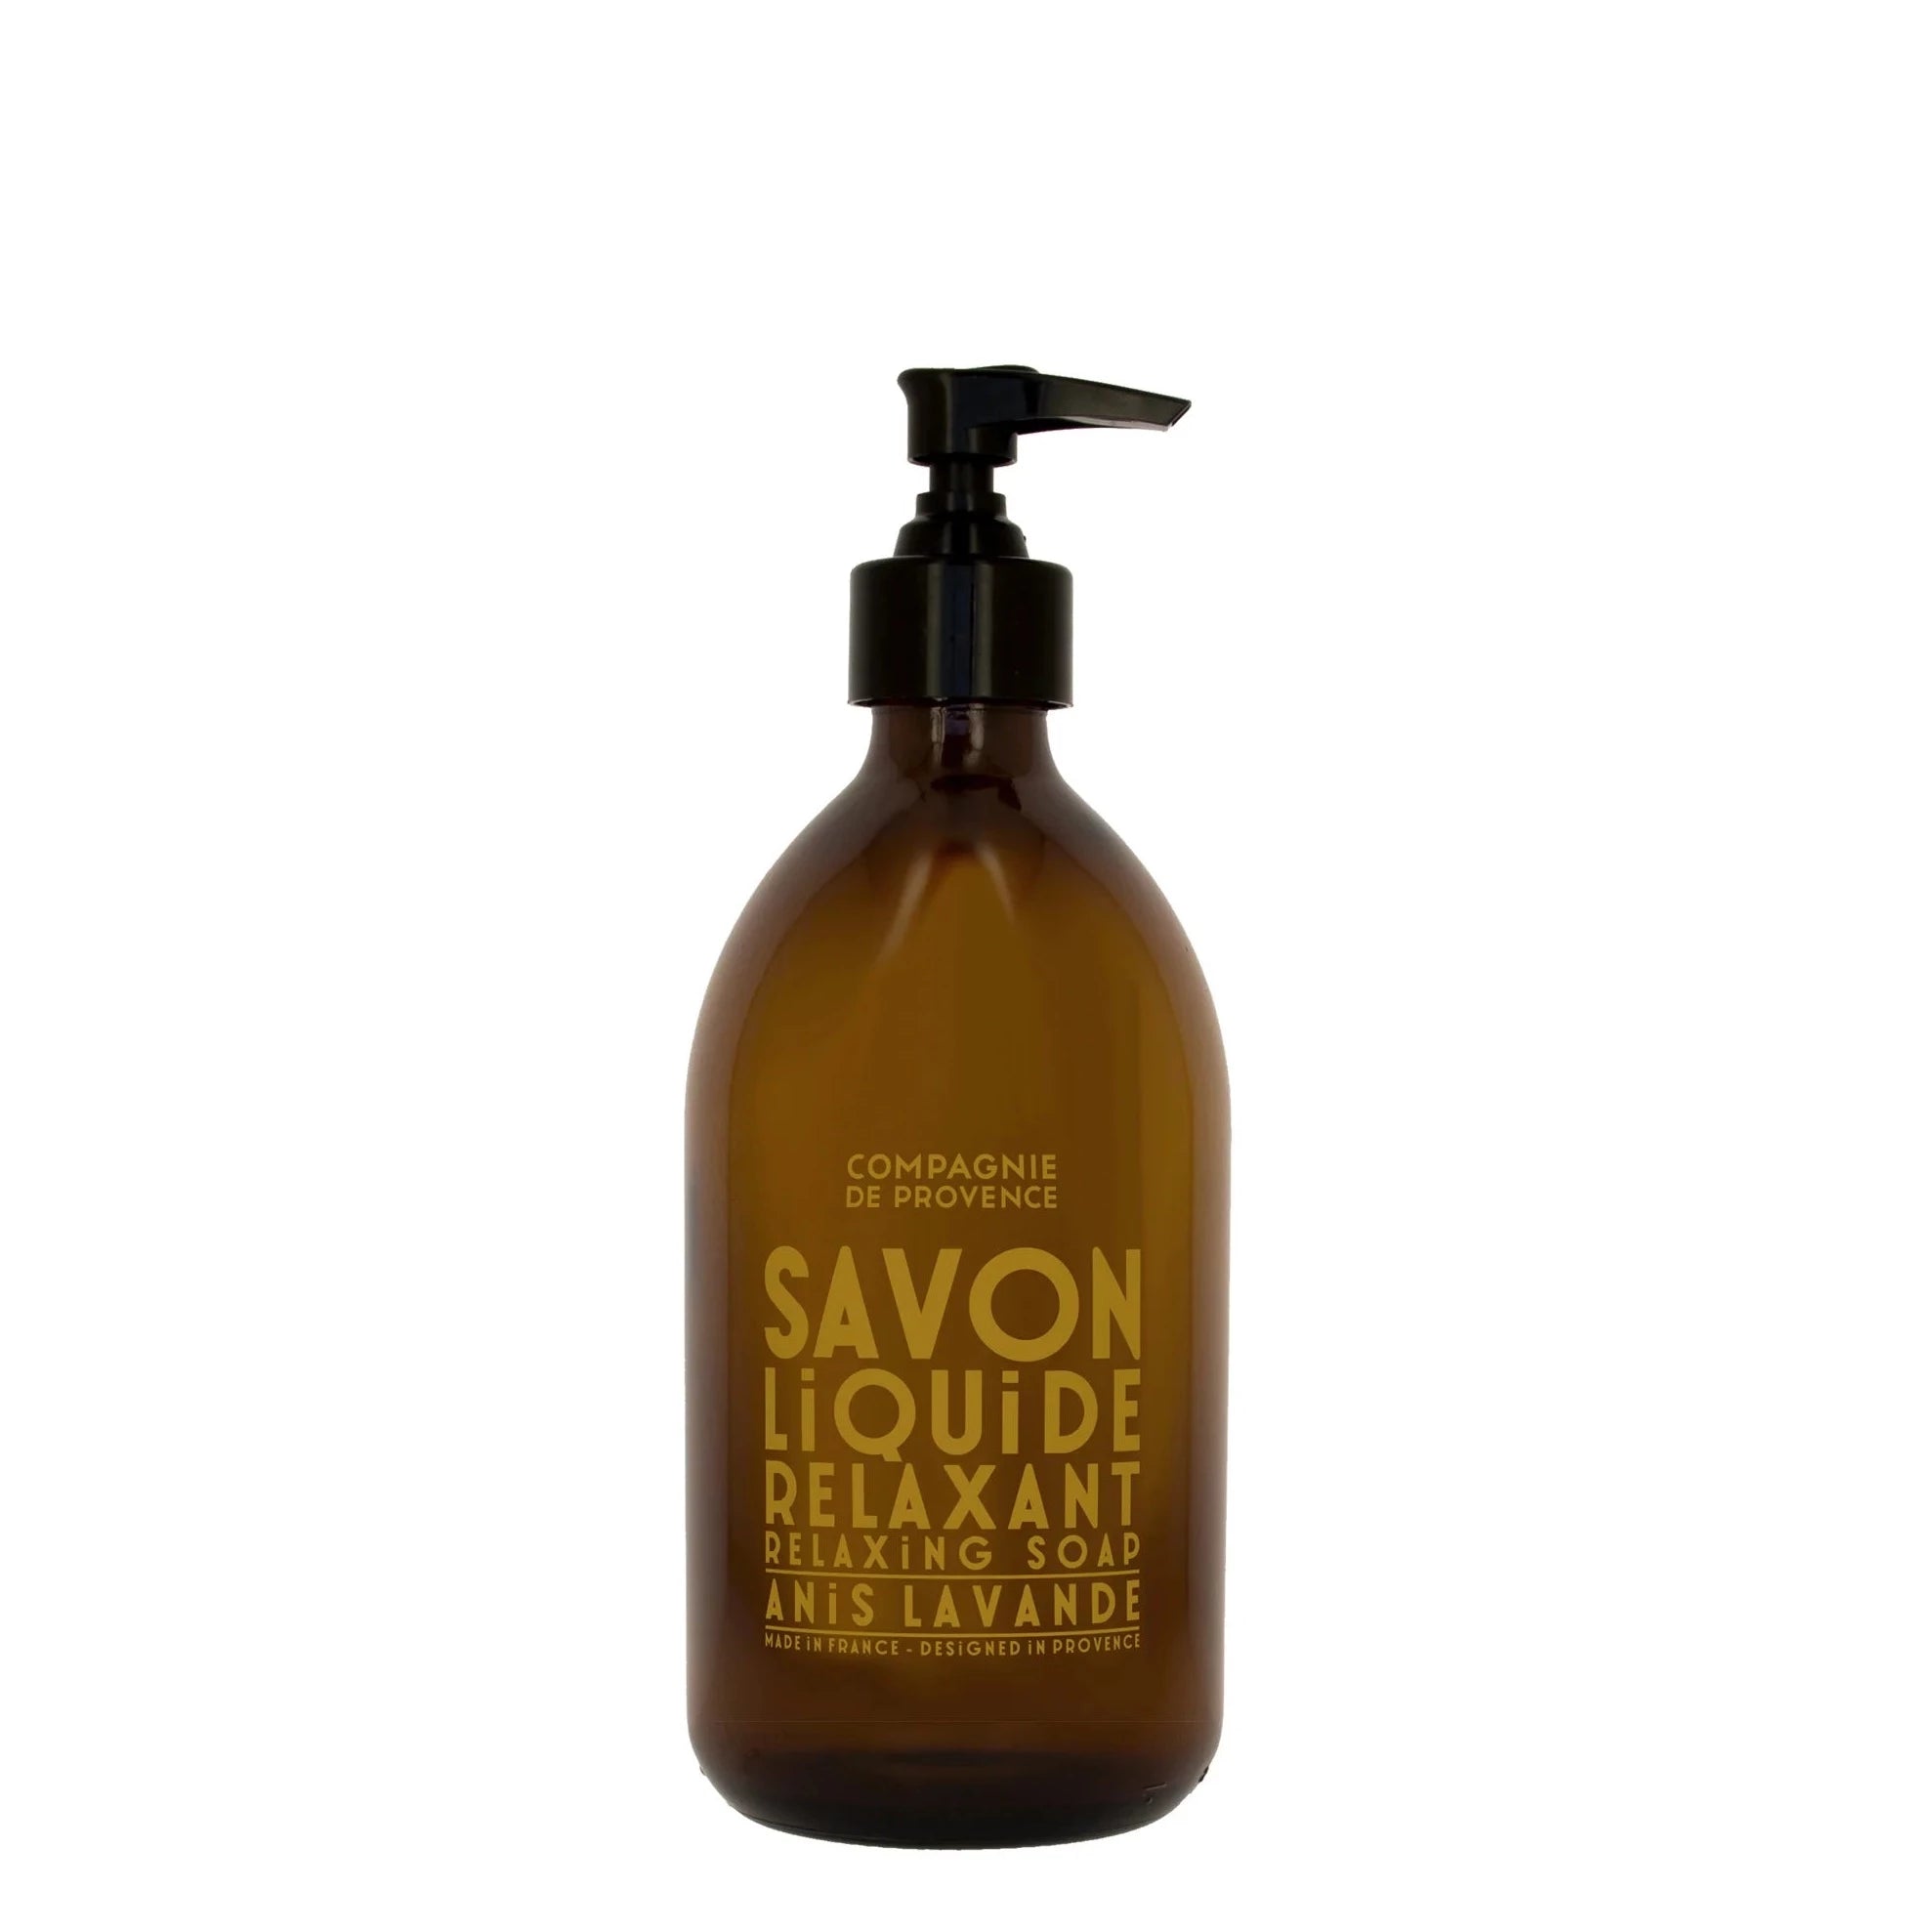 brown soap bottle with black dispenser. Has yellow text on the front